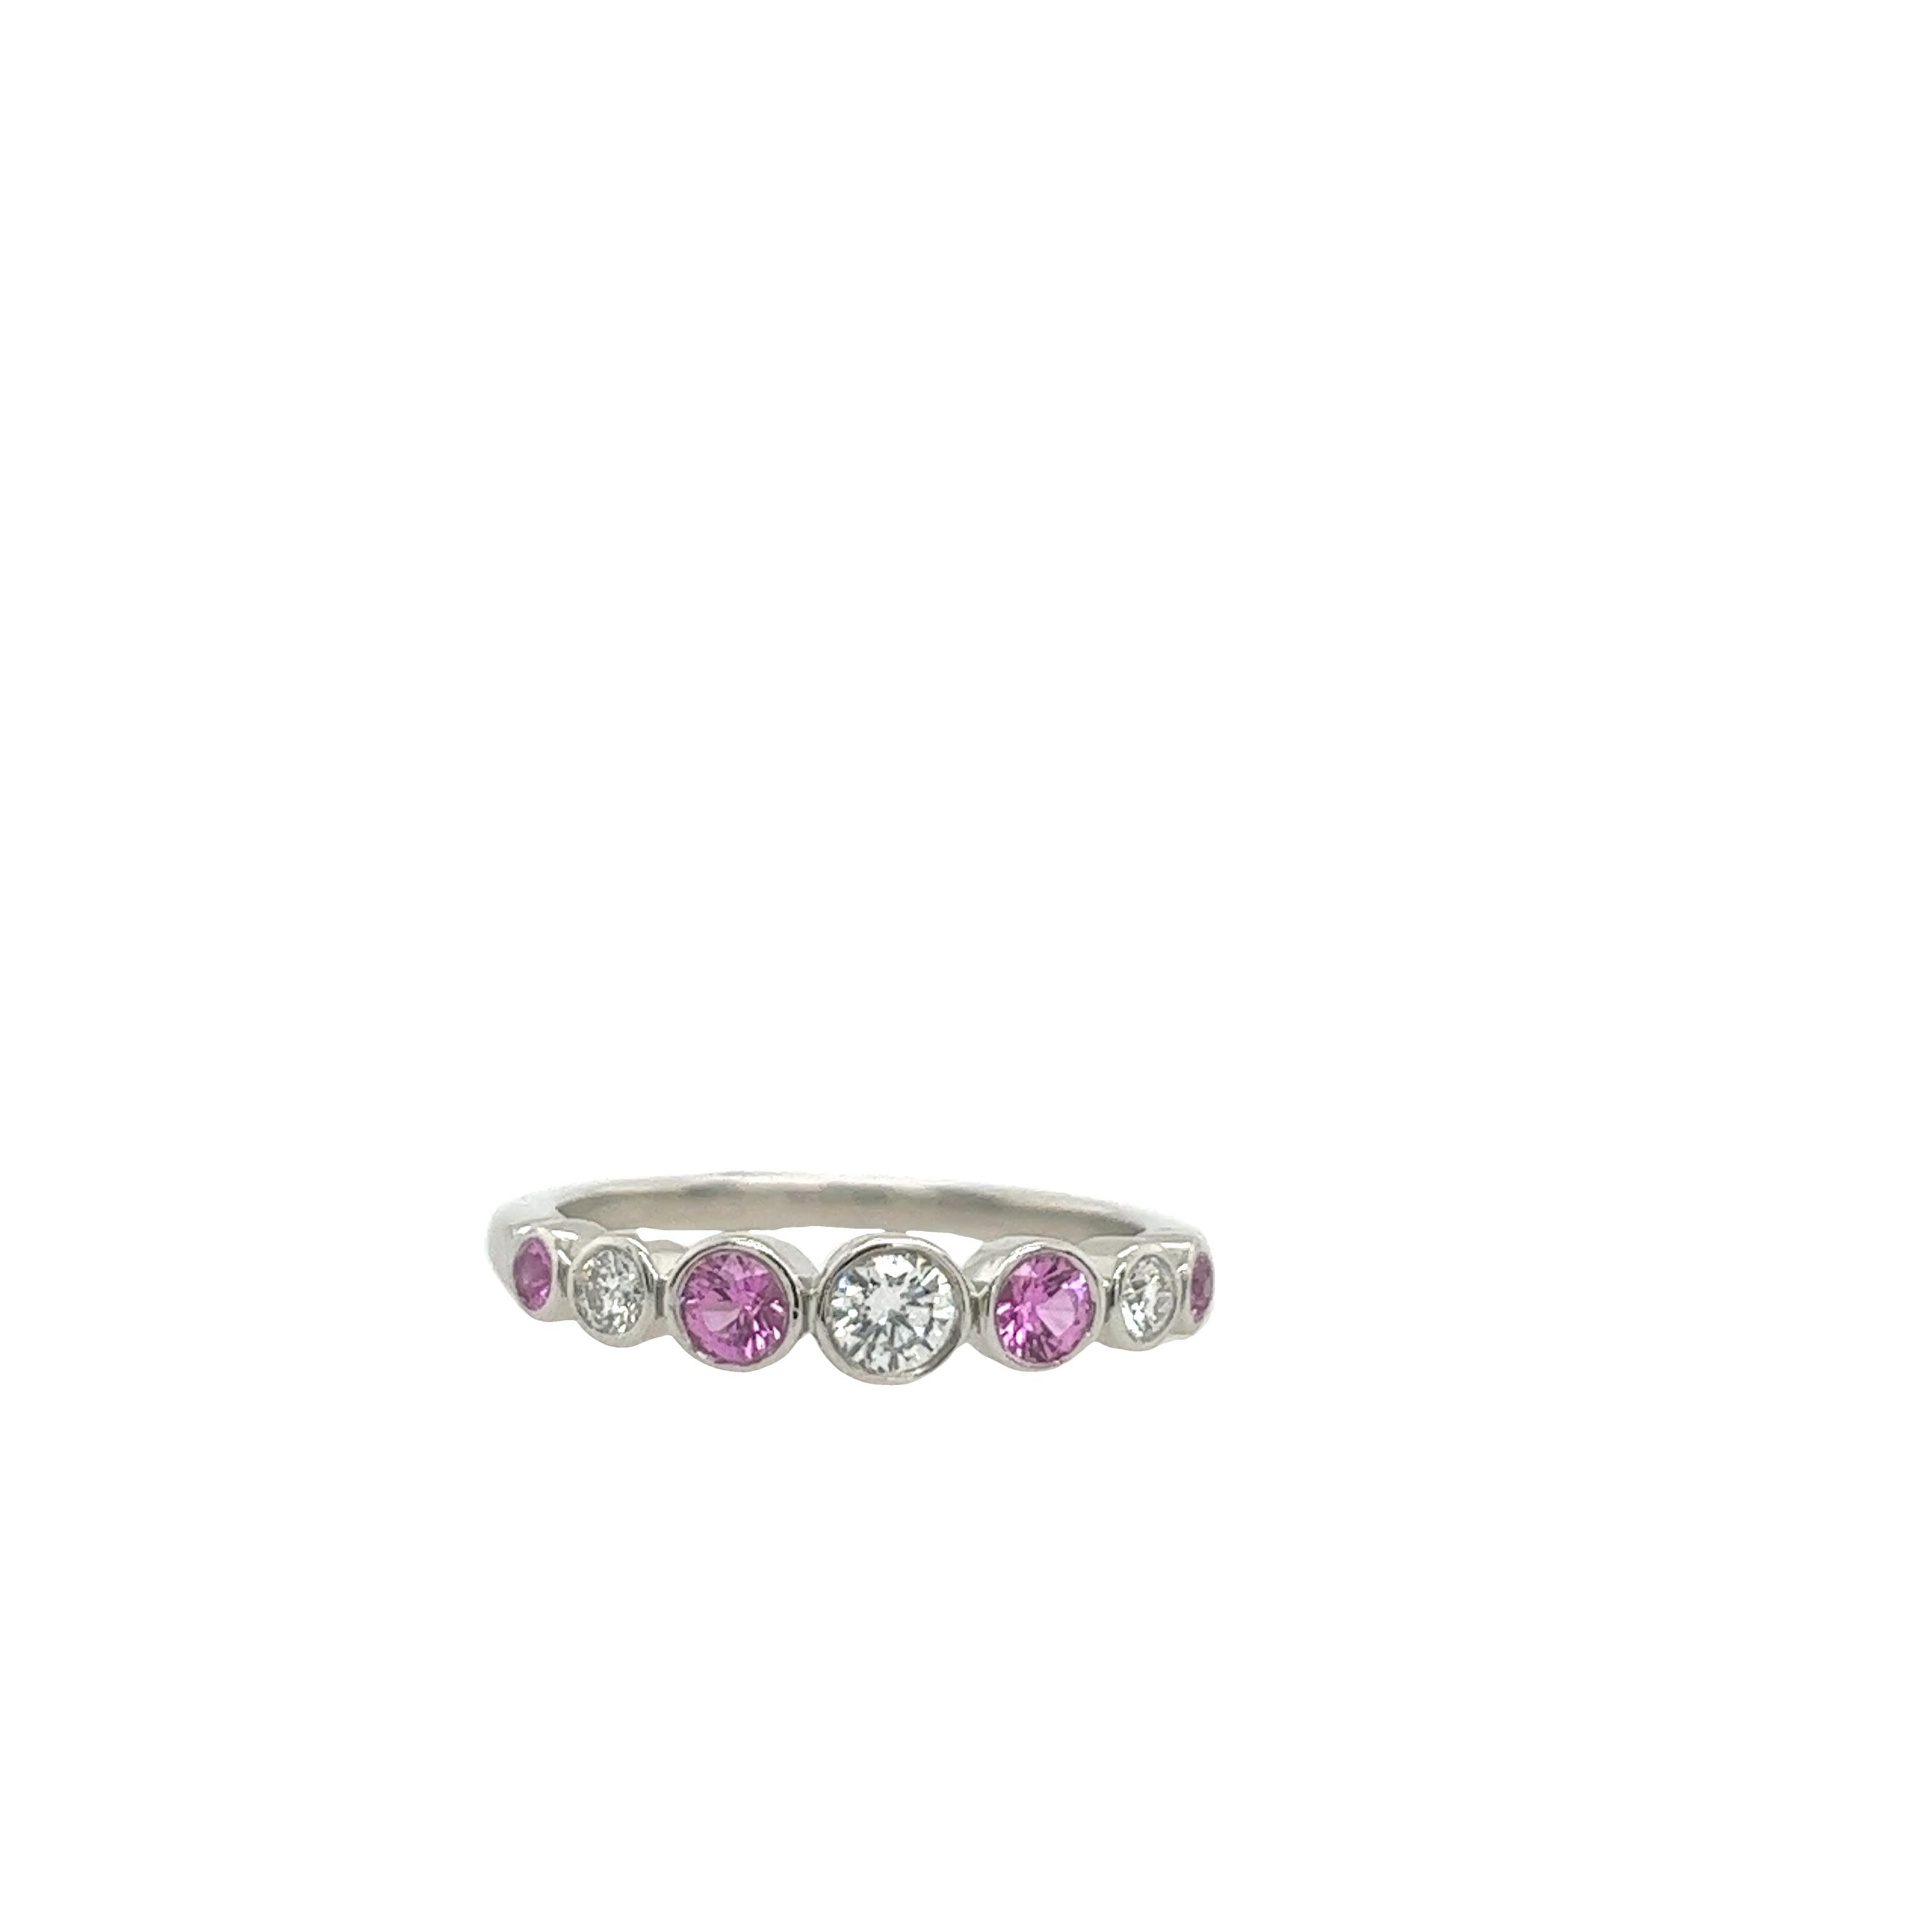 Women's Tiffany & Co. Jazz ring set with 3 Diamonds &4 Pink Sapphires in a graduated set For Sale